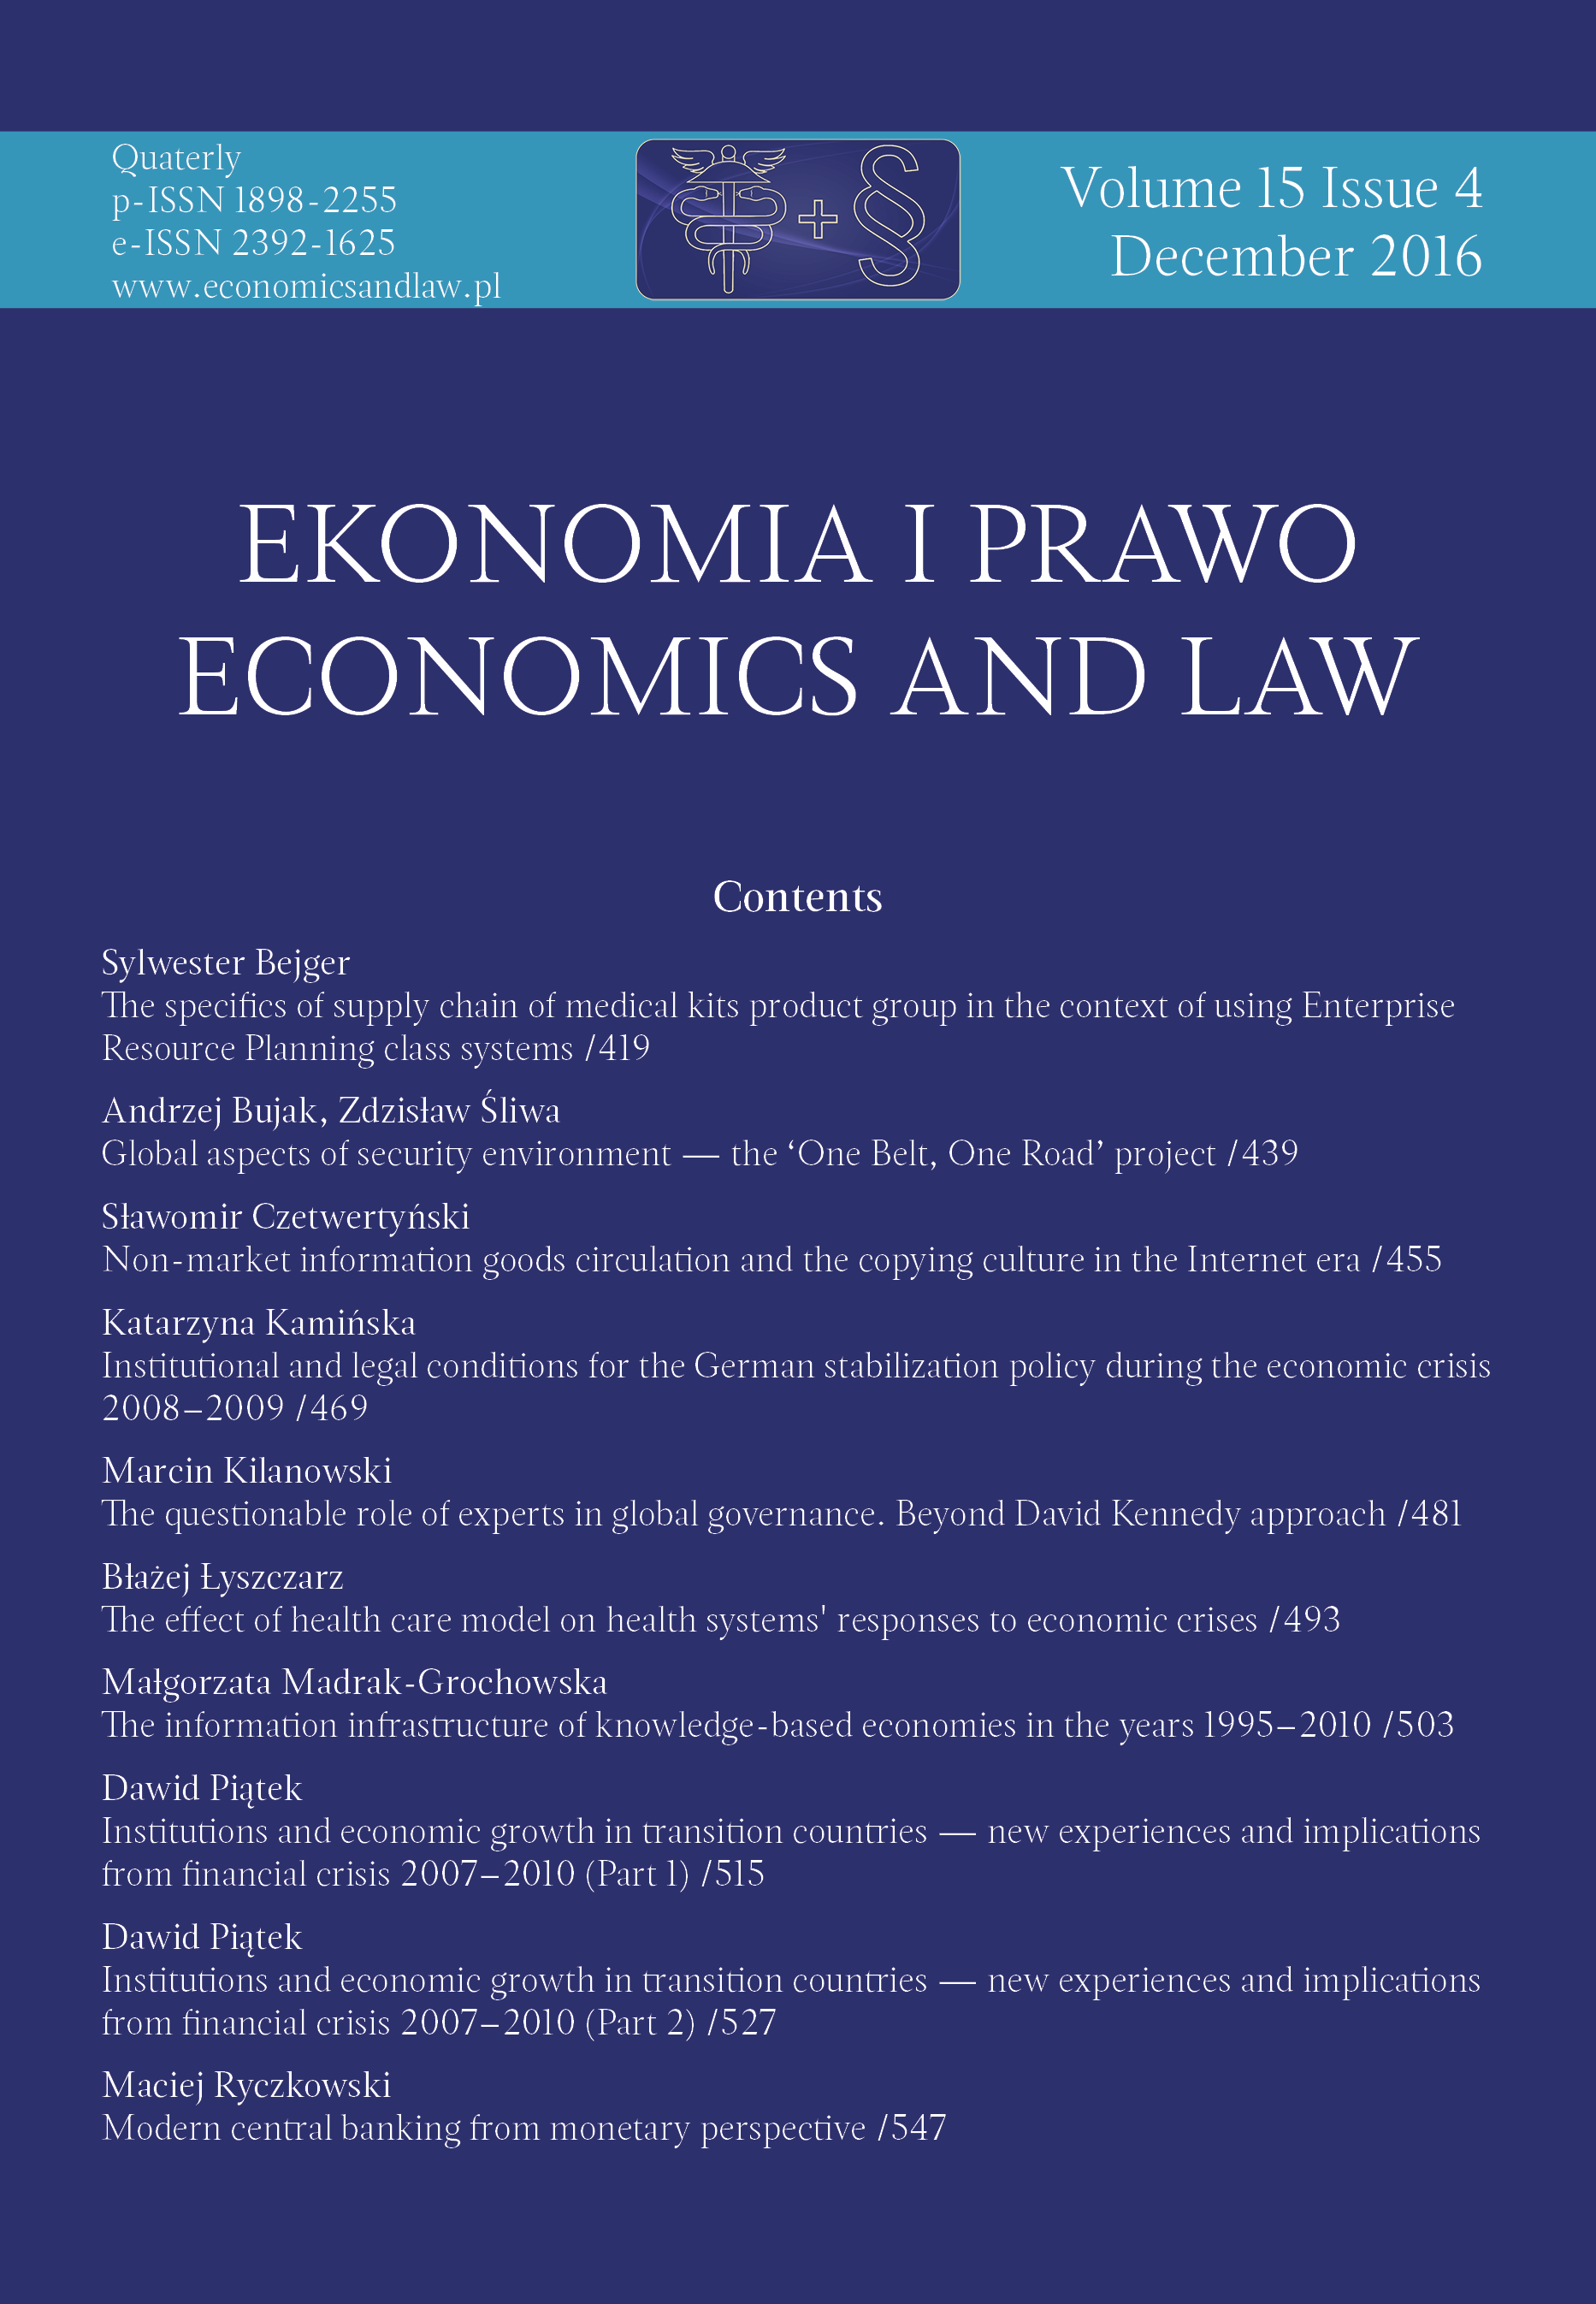 Institutions and economic growth in transition countries — new experiences and implications from financial crisis 2007–2010 (Part 1) Cover Image